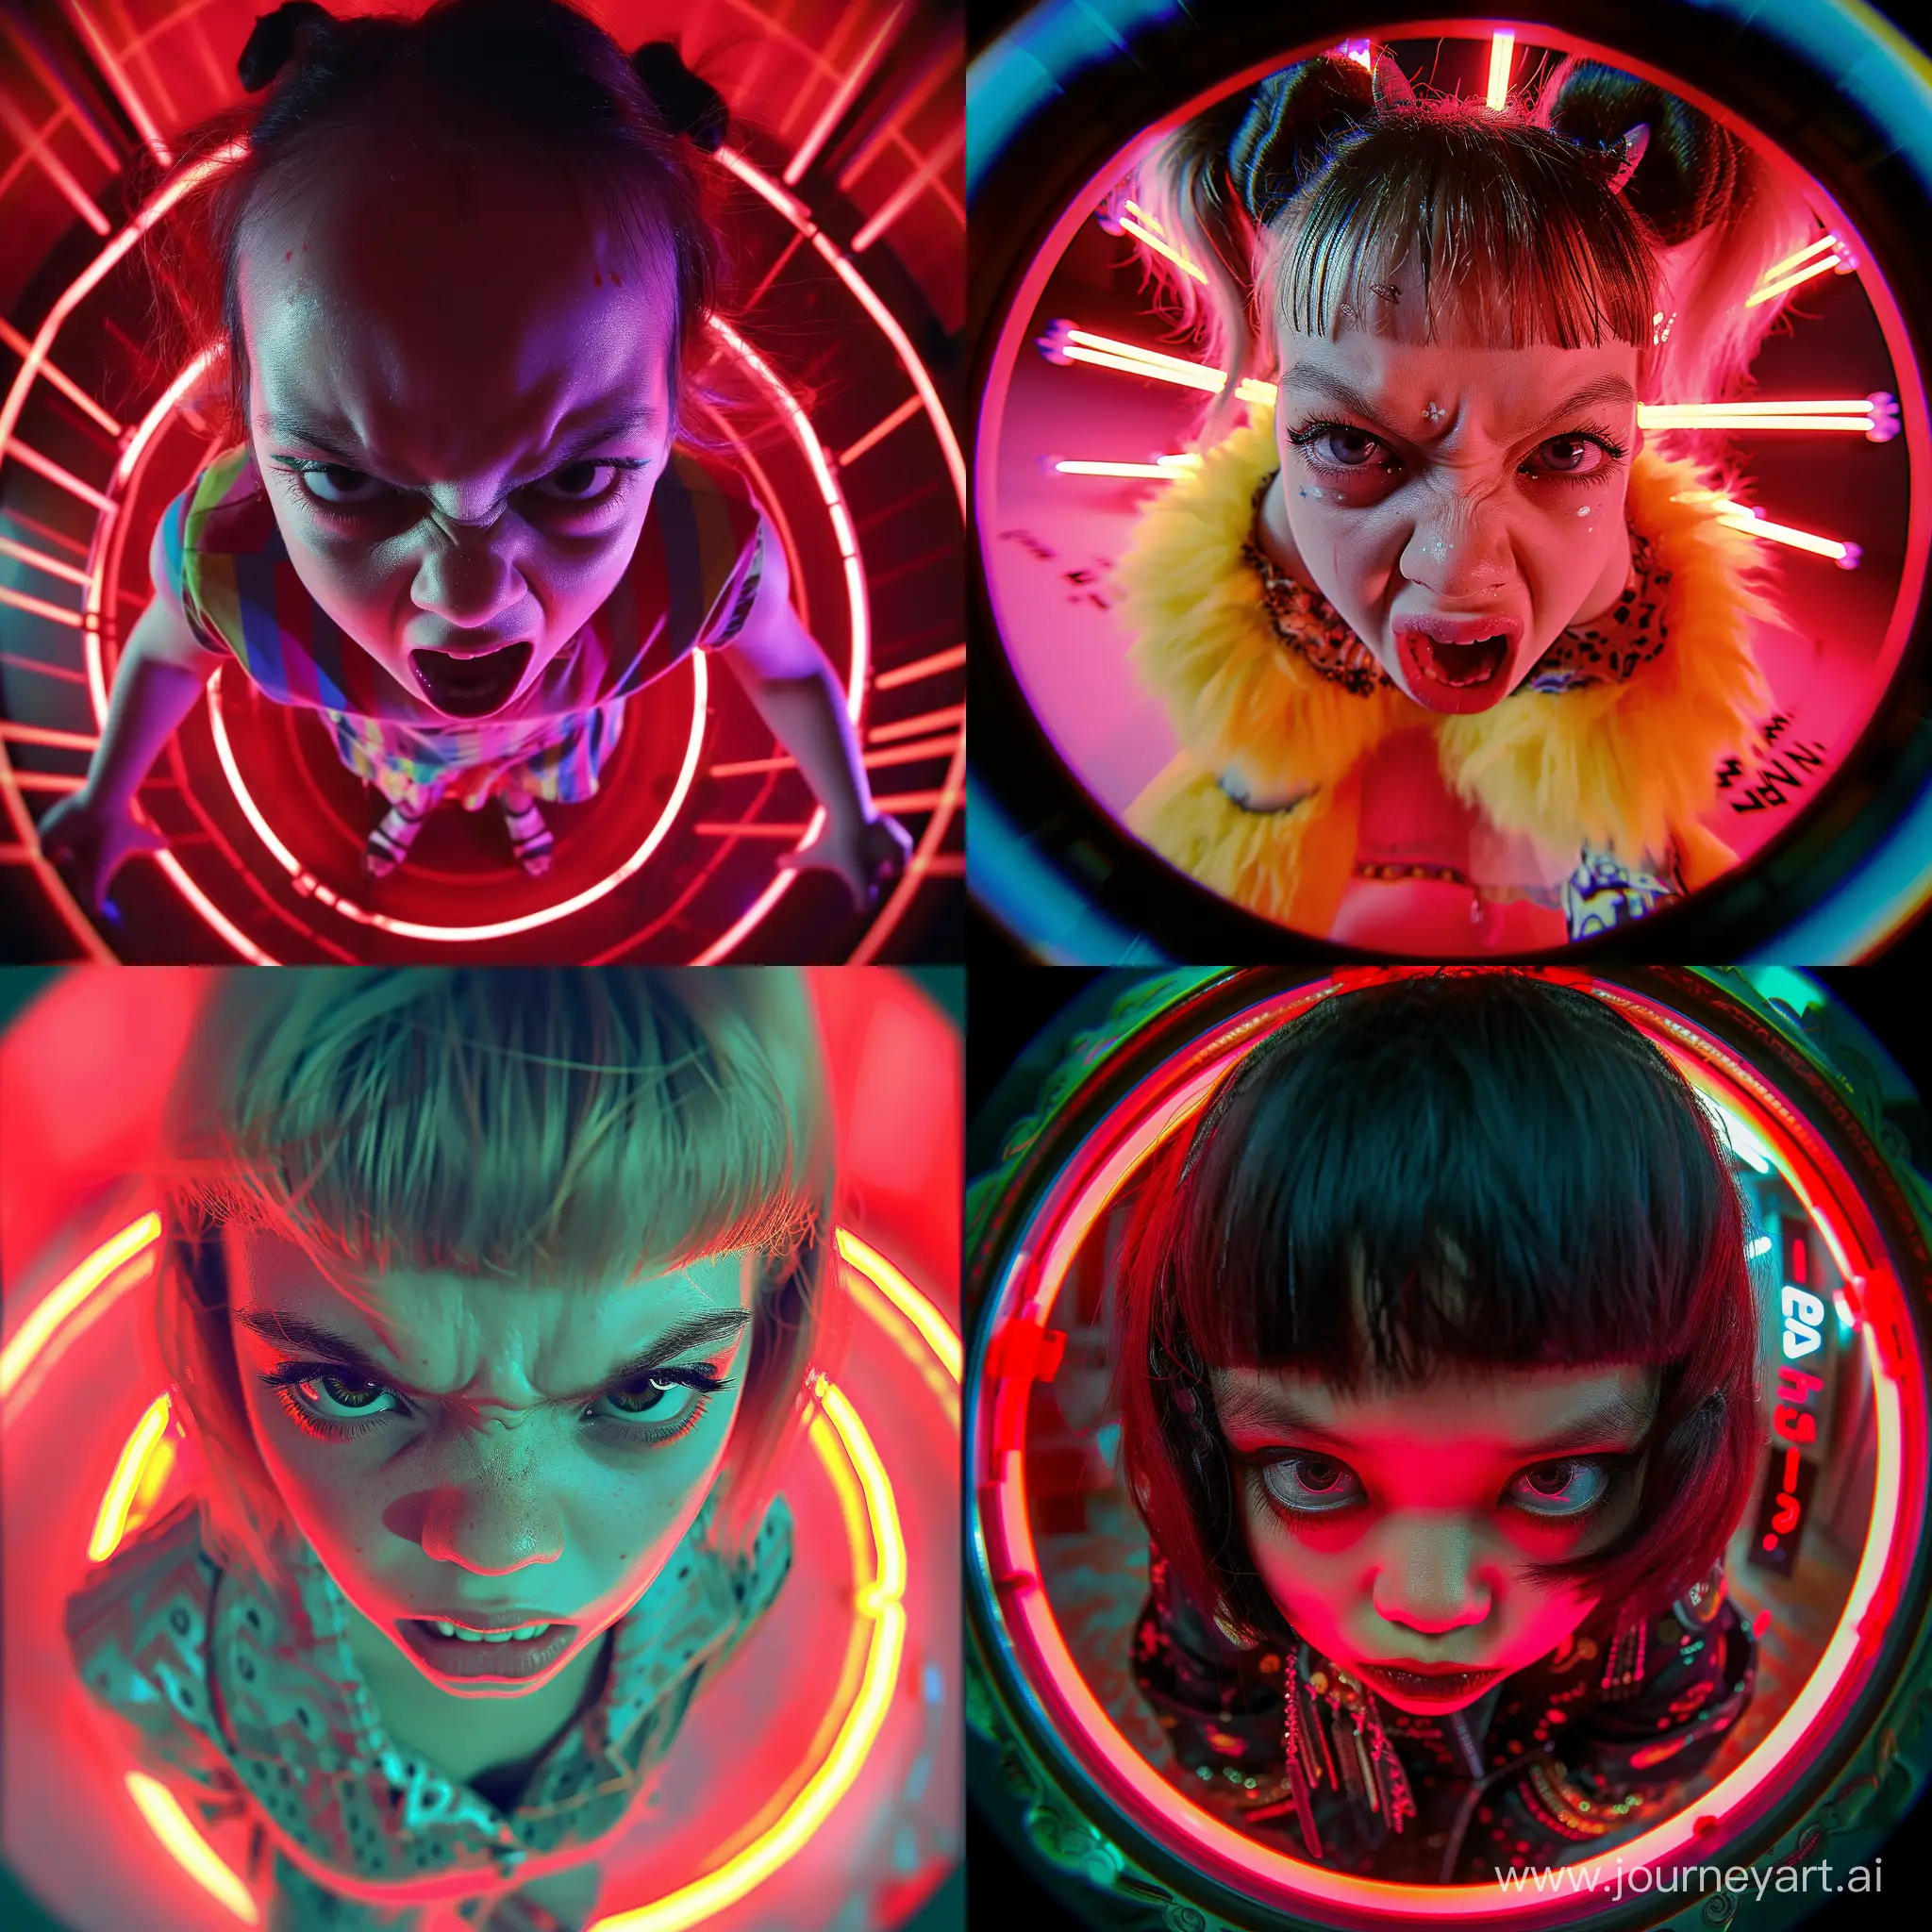 Create a highly detailed, colorful fashion shoot featuring a very extreme absurdly fantastic, angry little girl child. The image should be an extreme close-up with a fisheye lens, dynamic camera angle, and dramatic red light neon effects. The orientation should be square." --s 150 --ar 1:1 --c 10